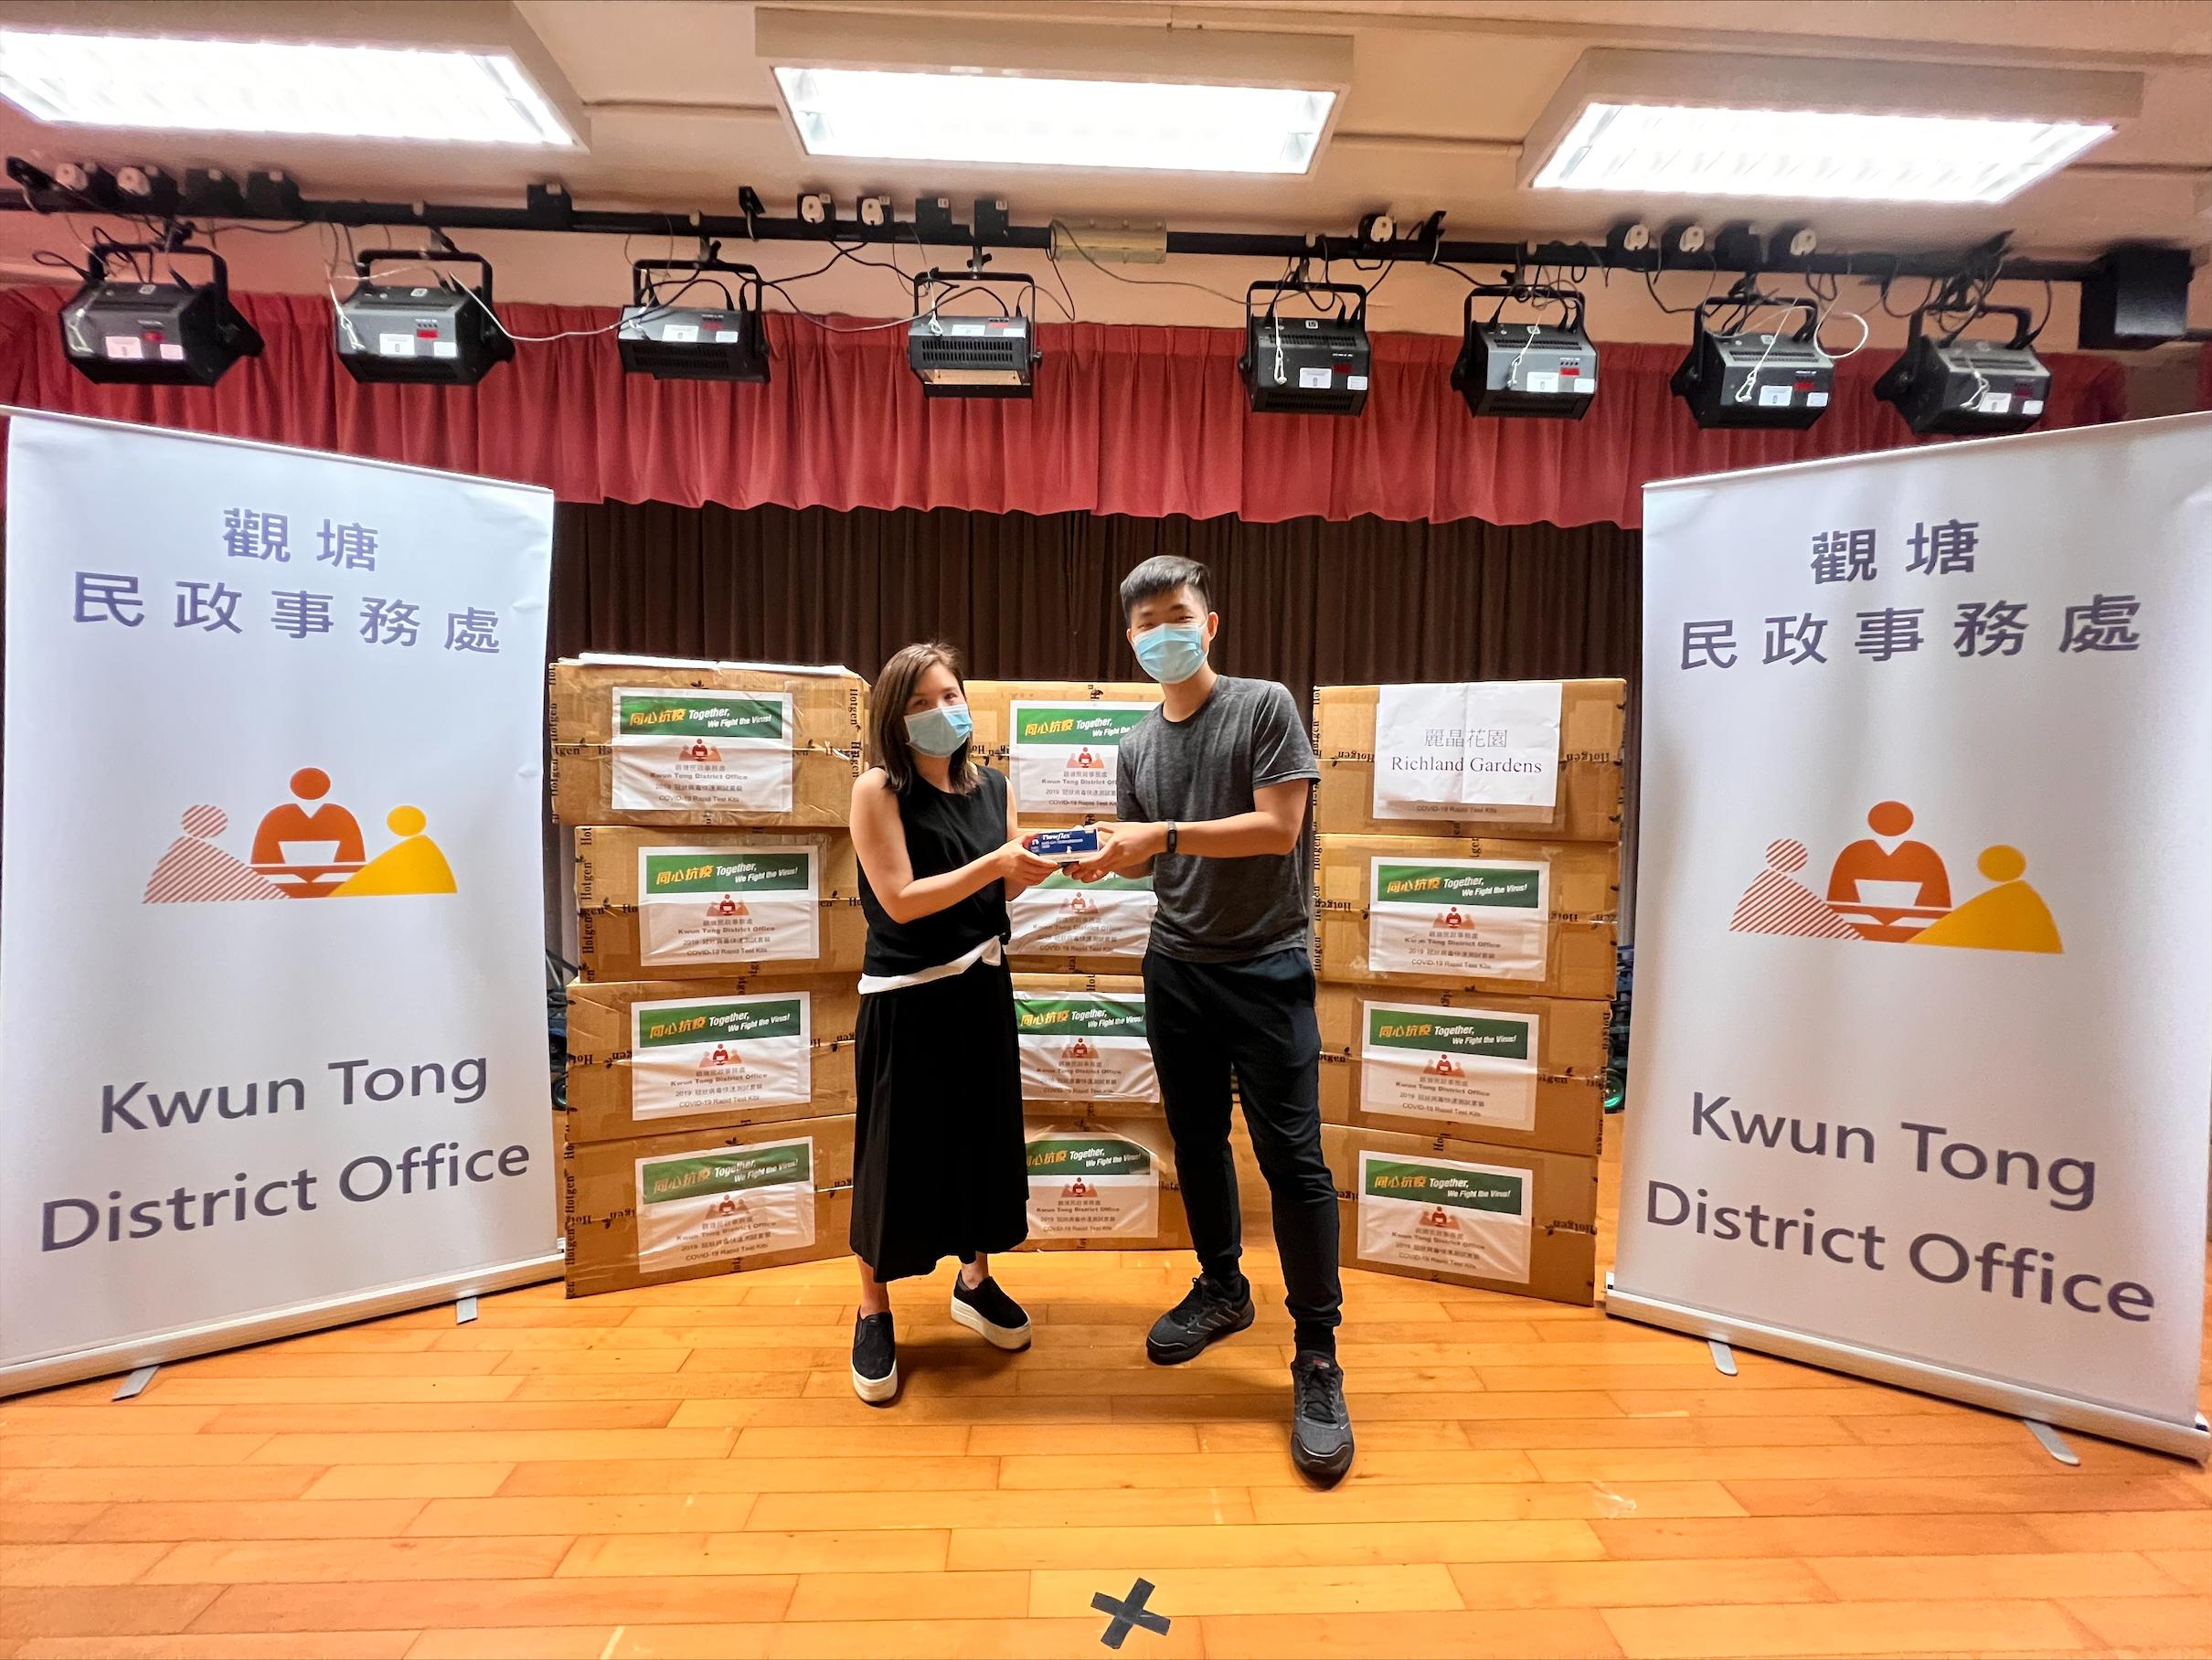 The Kwun Tong District Office today (June 16) distributed COVID-19 rapid test kits to households, cleansing workers and property management staff living and working in Richland Gardens for voluntary testing through the property management company.